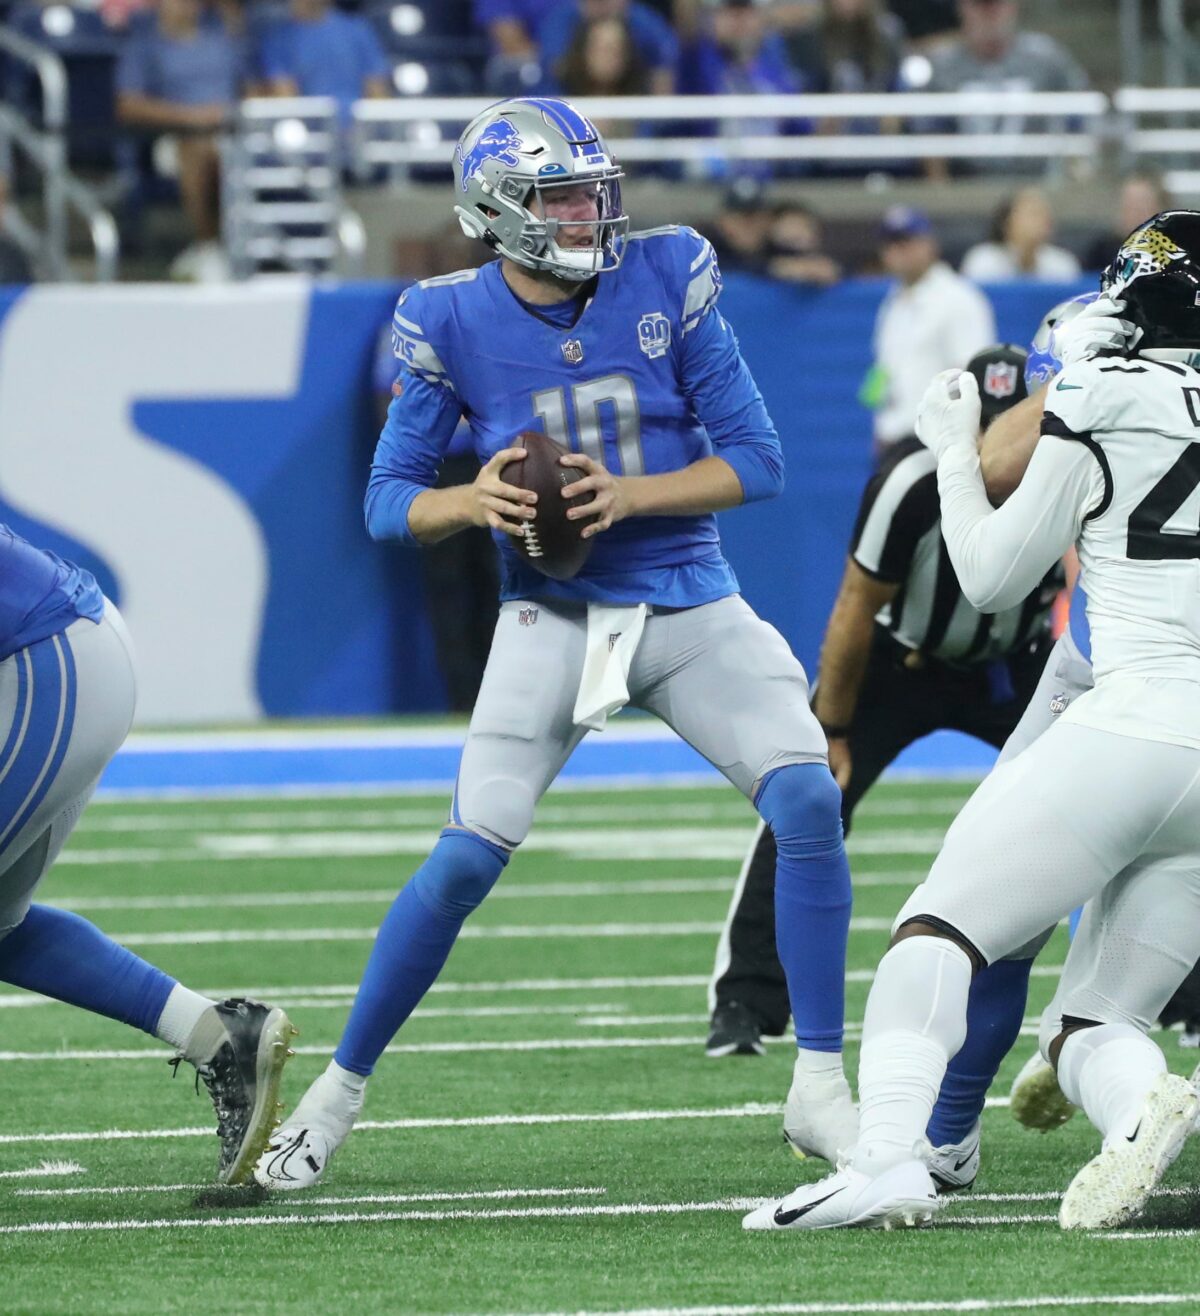 Nate Sudfeld’s knee injury makes the Lions QB decision easier